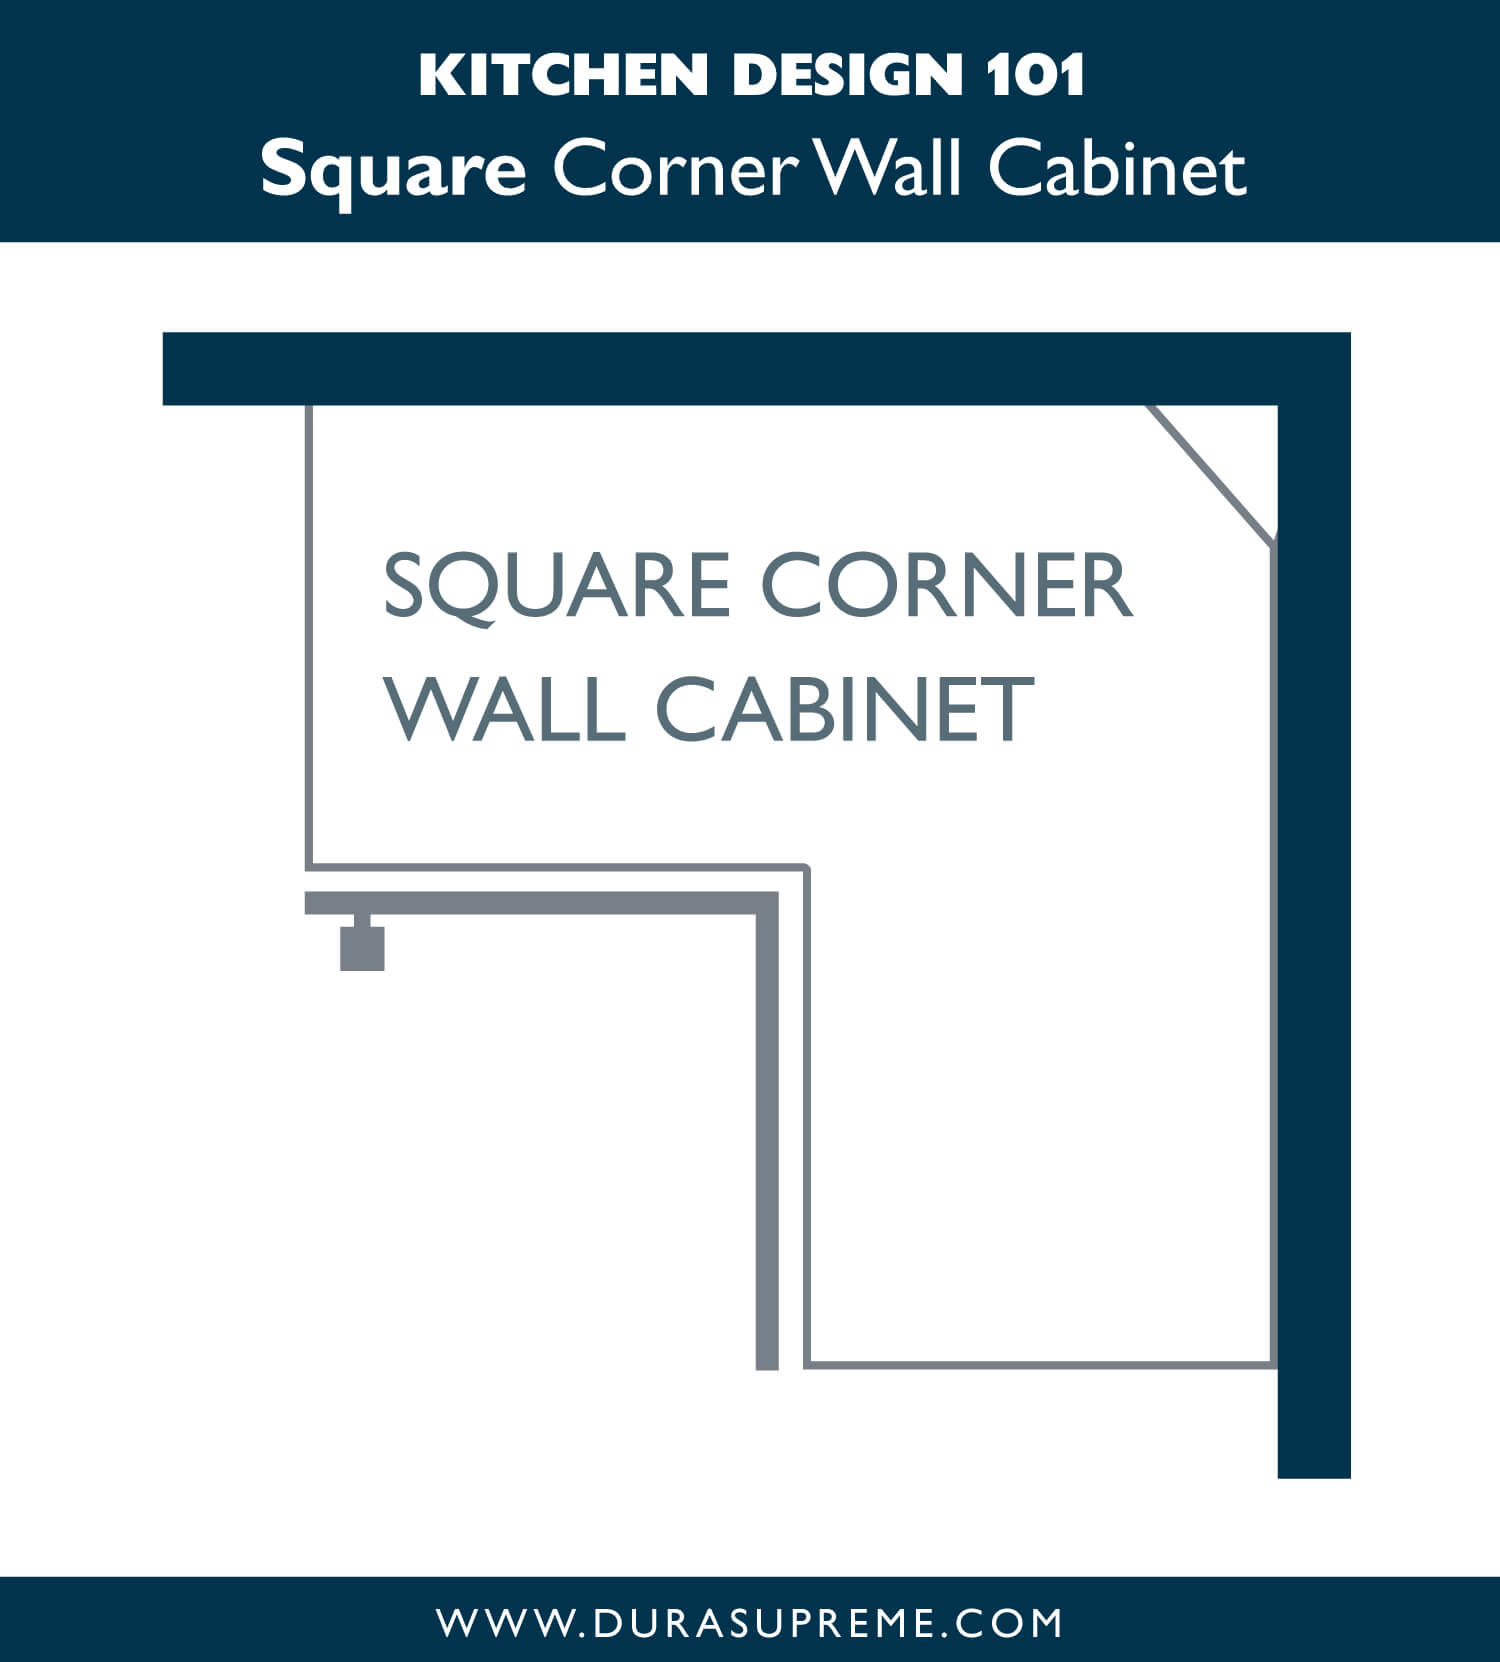 Kitchen Design 101: What is a Square Corner Wall Cabinet?